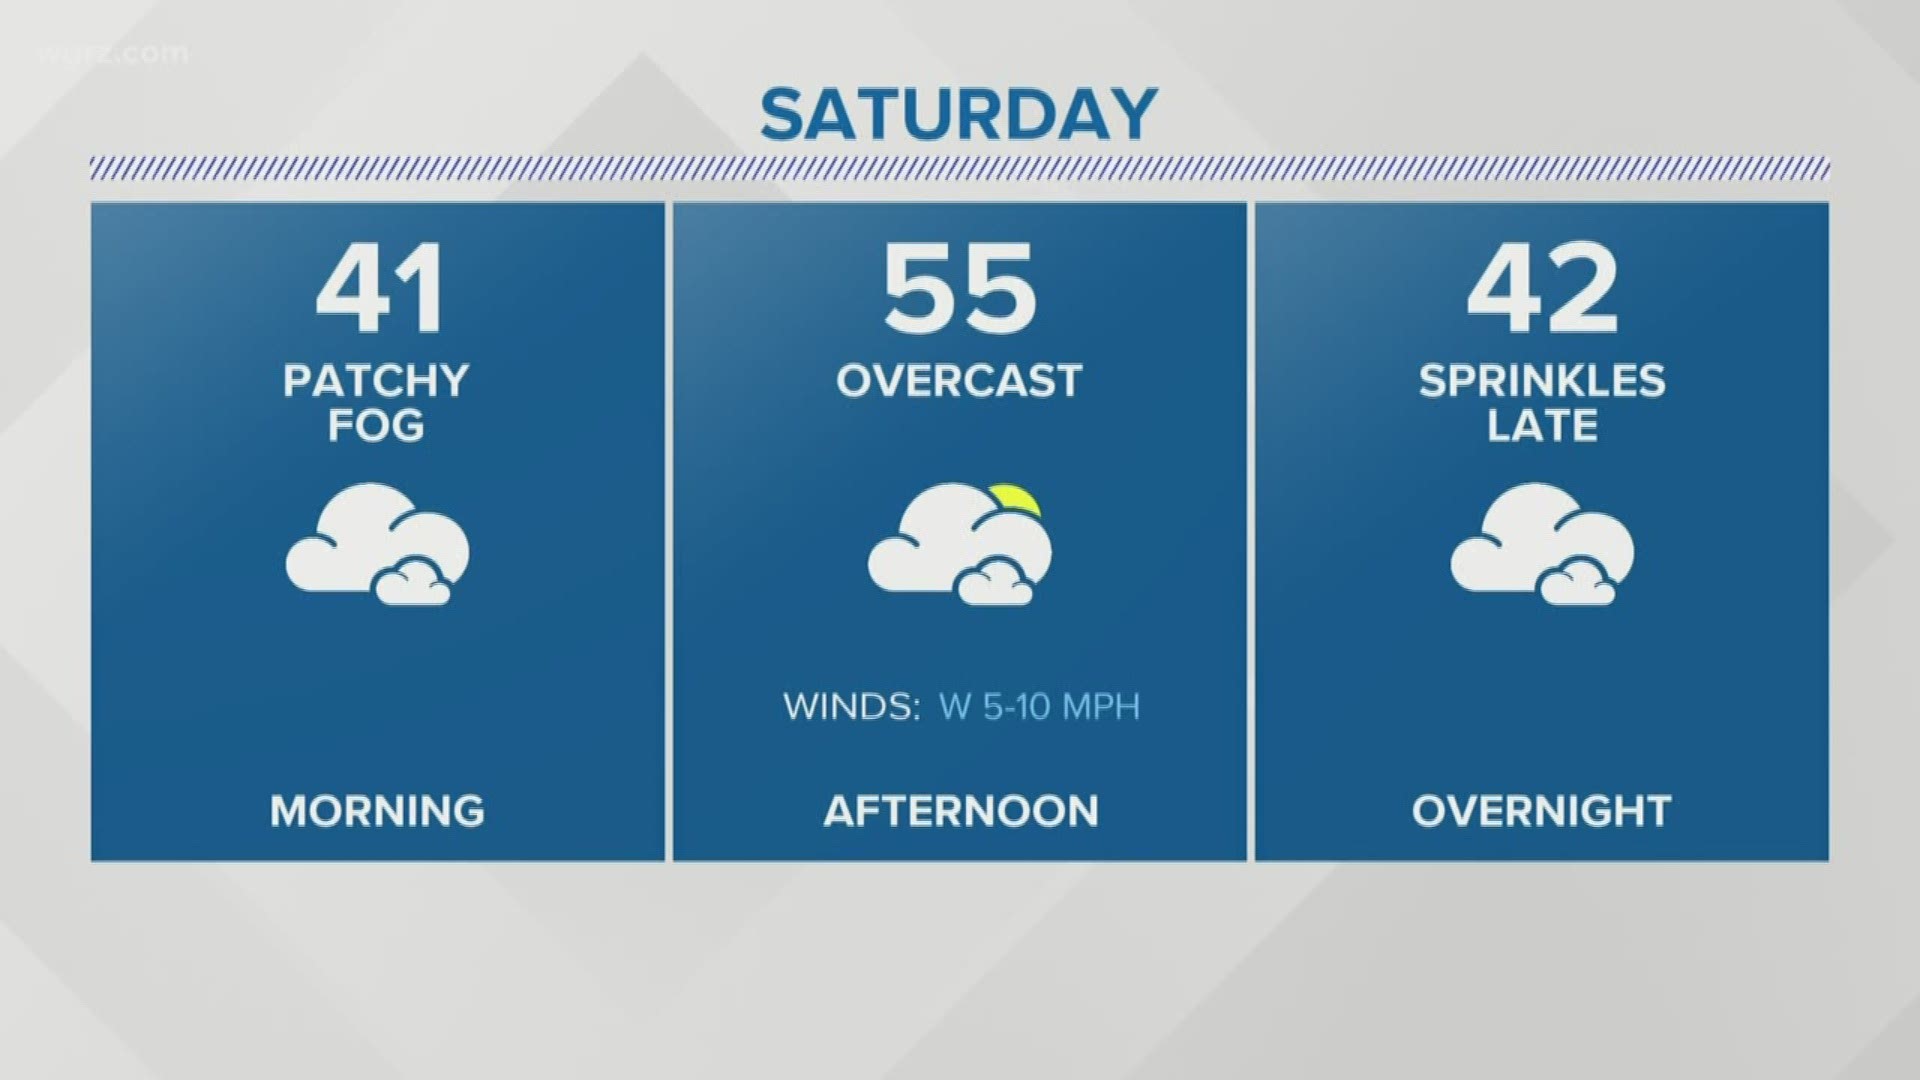 A lot of clouds tonight, still plenty of gray Saturday morning. Maybe a little bit of clearing in the afternoon, but likely not until late.